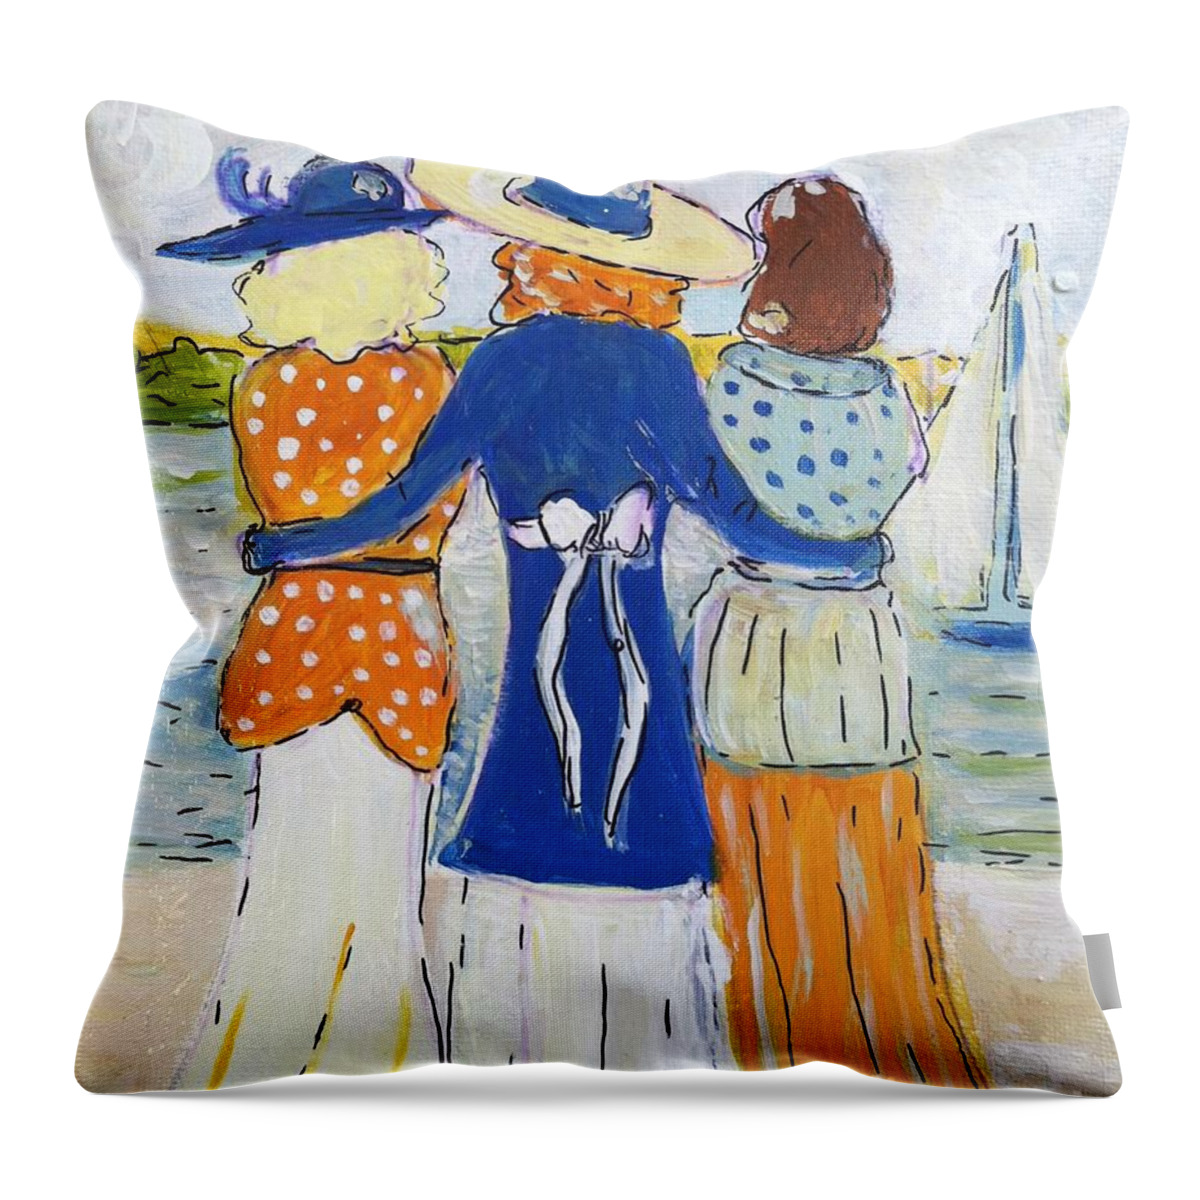 Soul Sisters Throw Pillow featuring the painting Soul Sisters by Jacqui Hawk